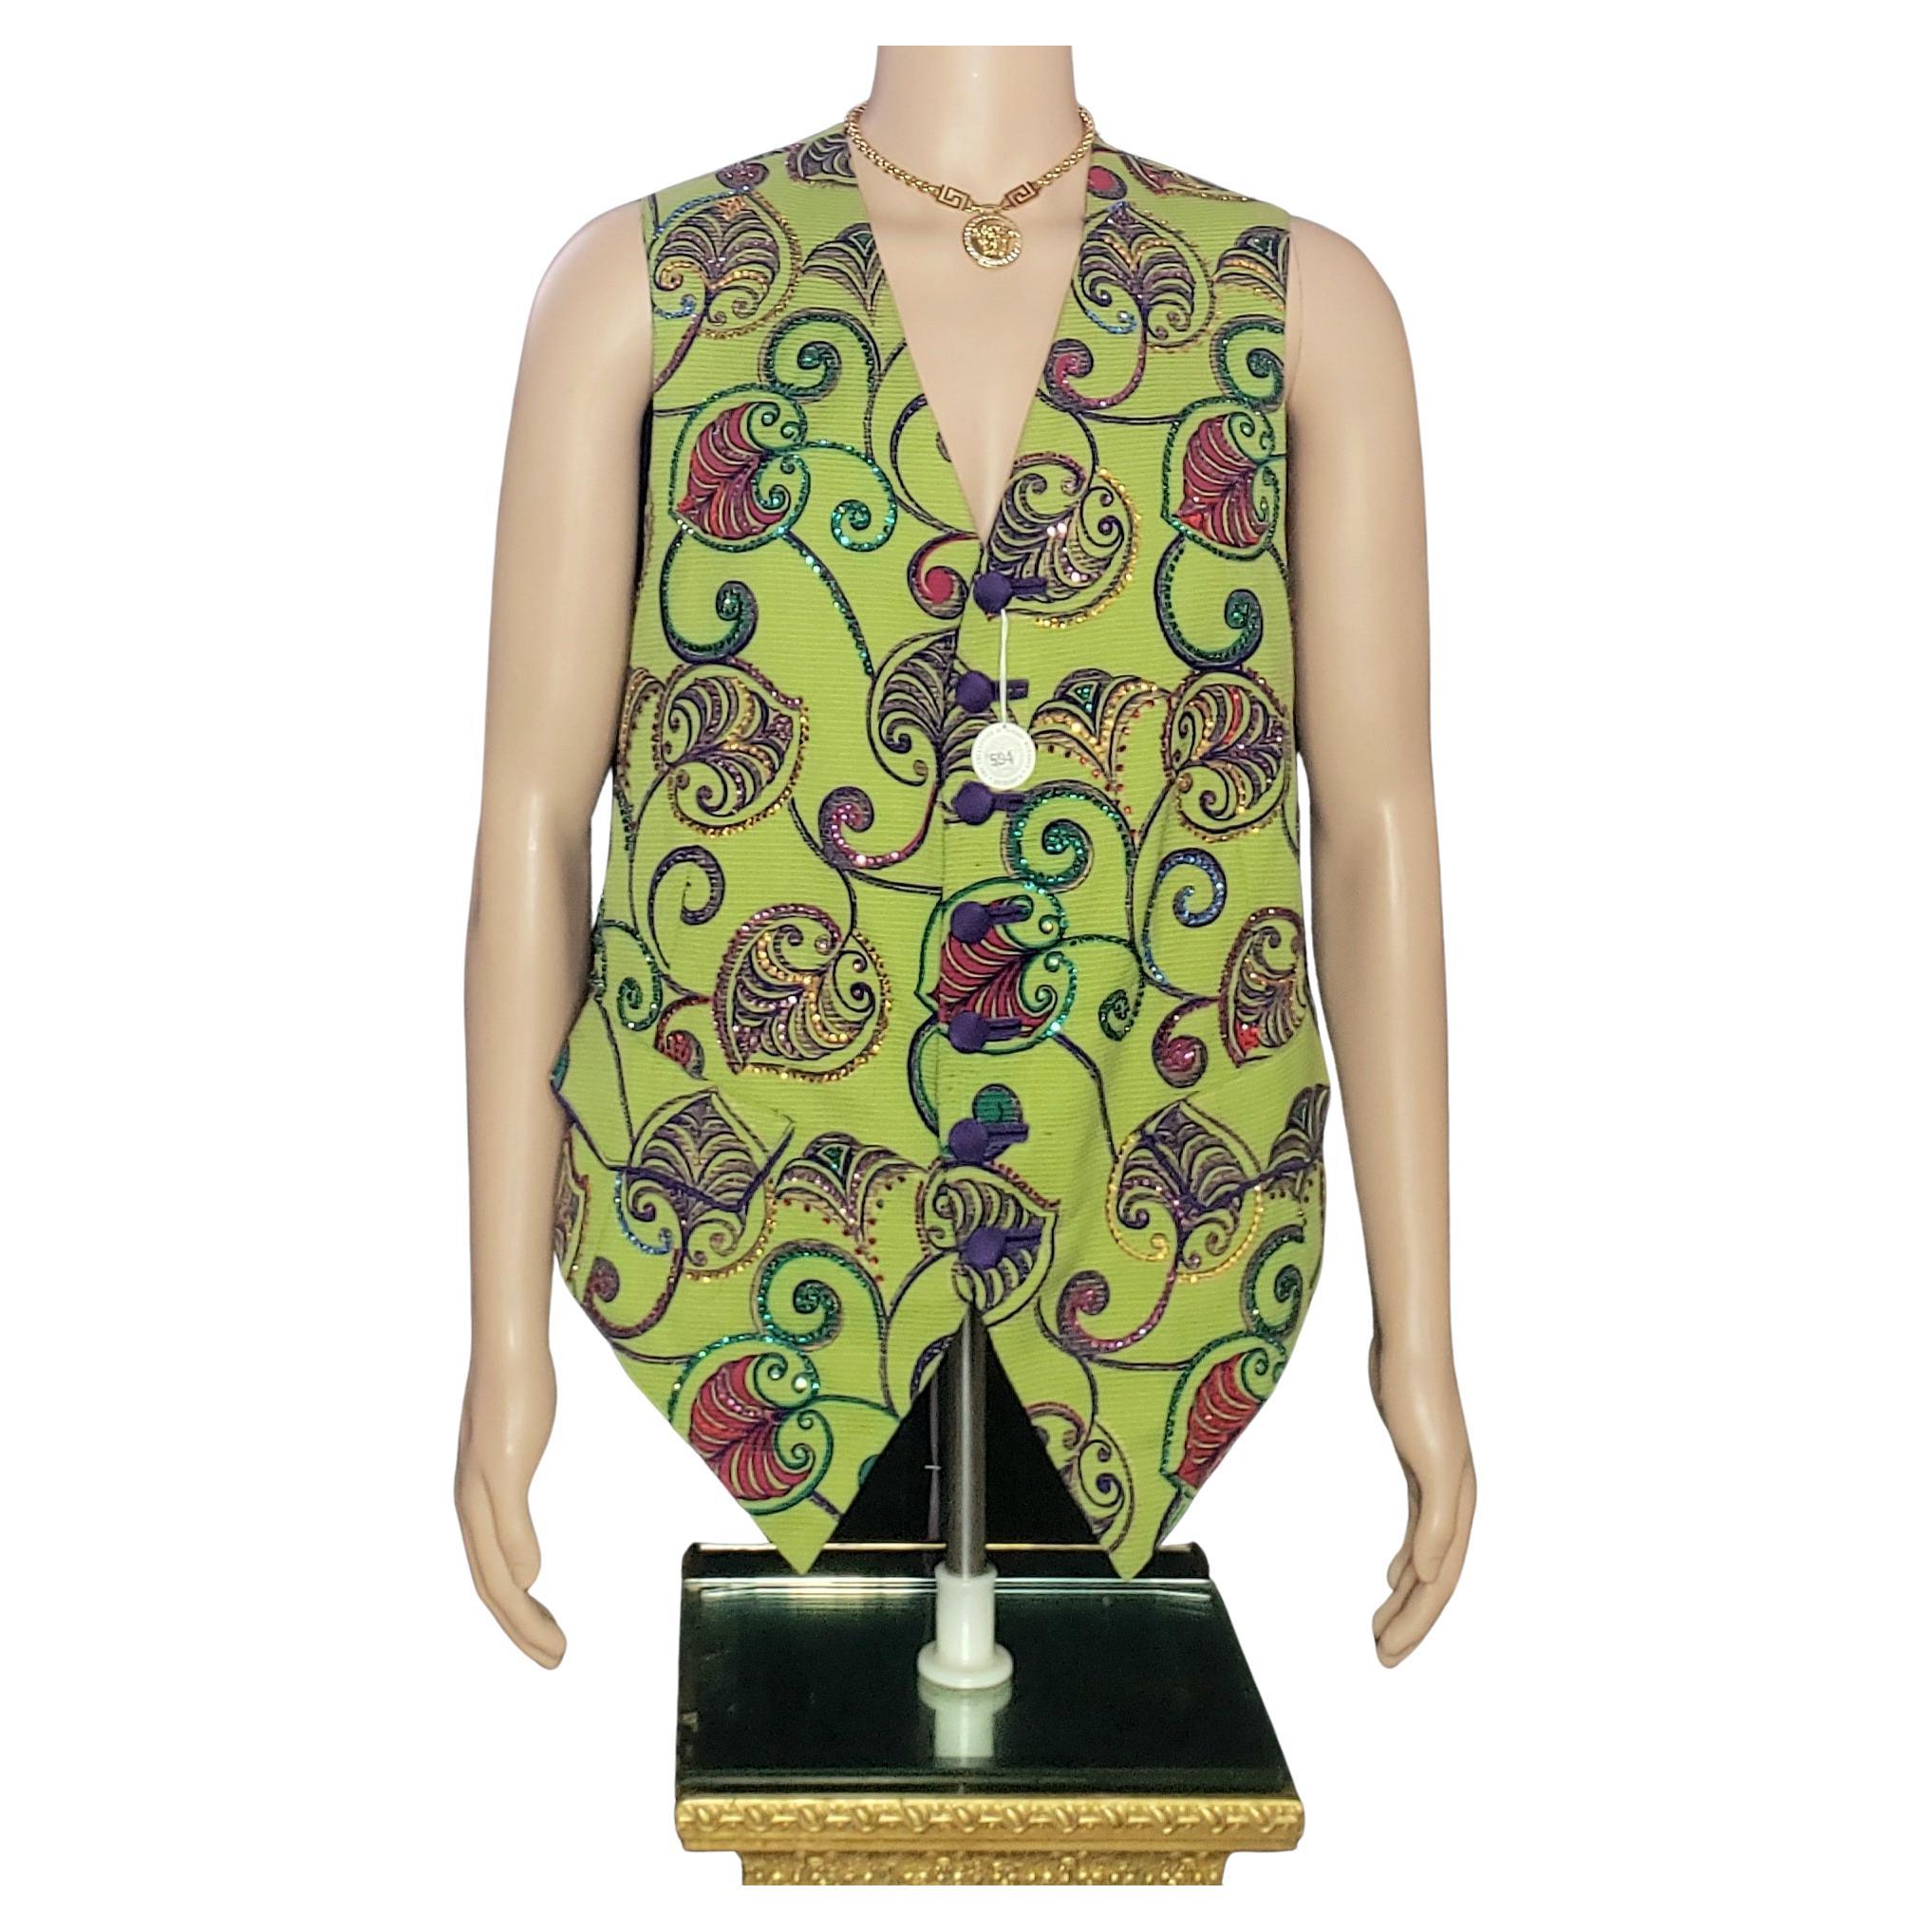 1991 GIANNI VERSACE PRIVATE COLLECTION SILK TWILL WAISTCOAT w/ SEQUIN EMBROIDERY For Sale